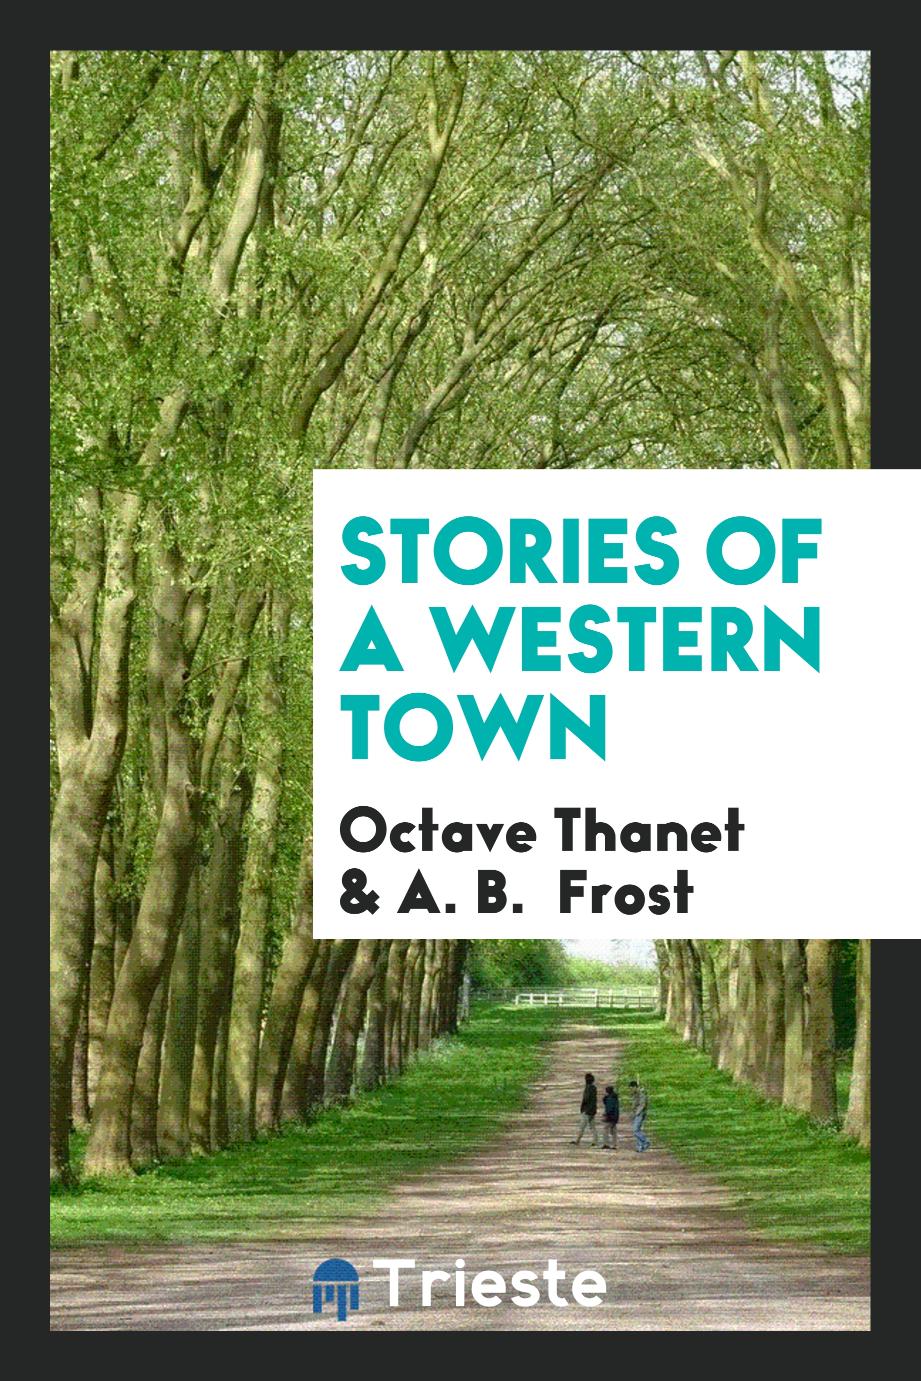 Stories of a western town